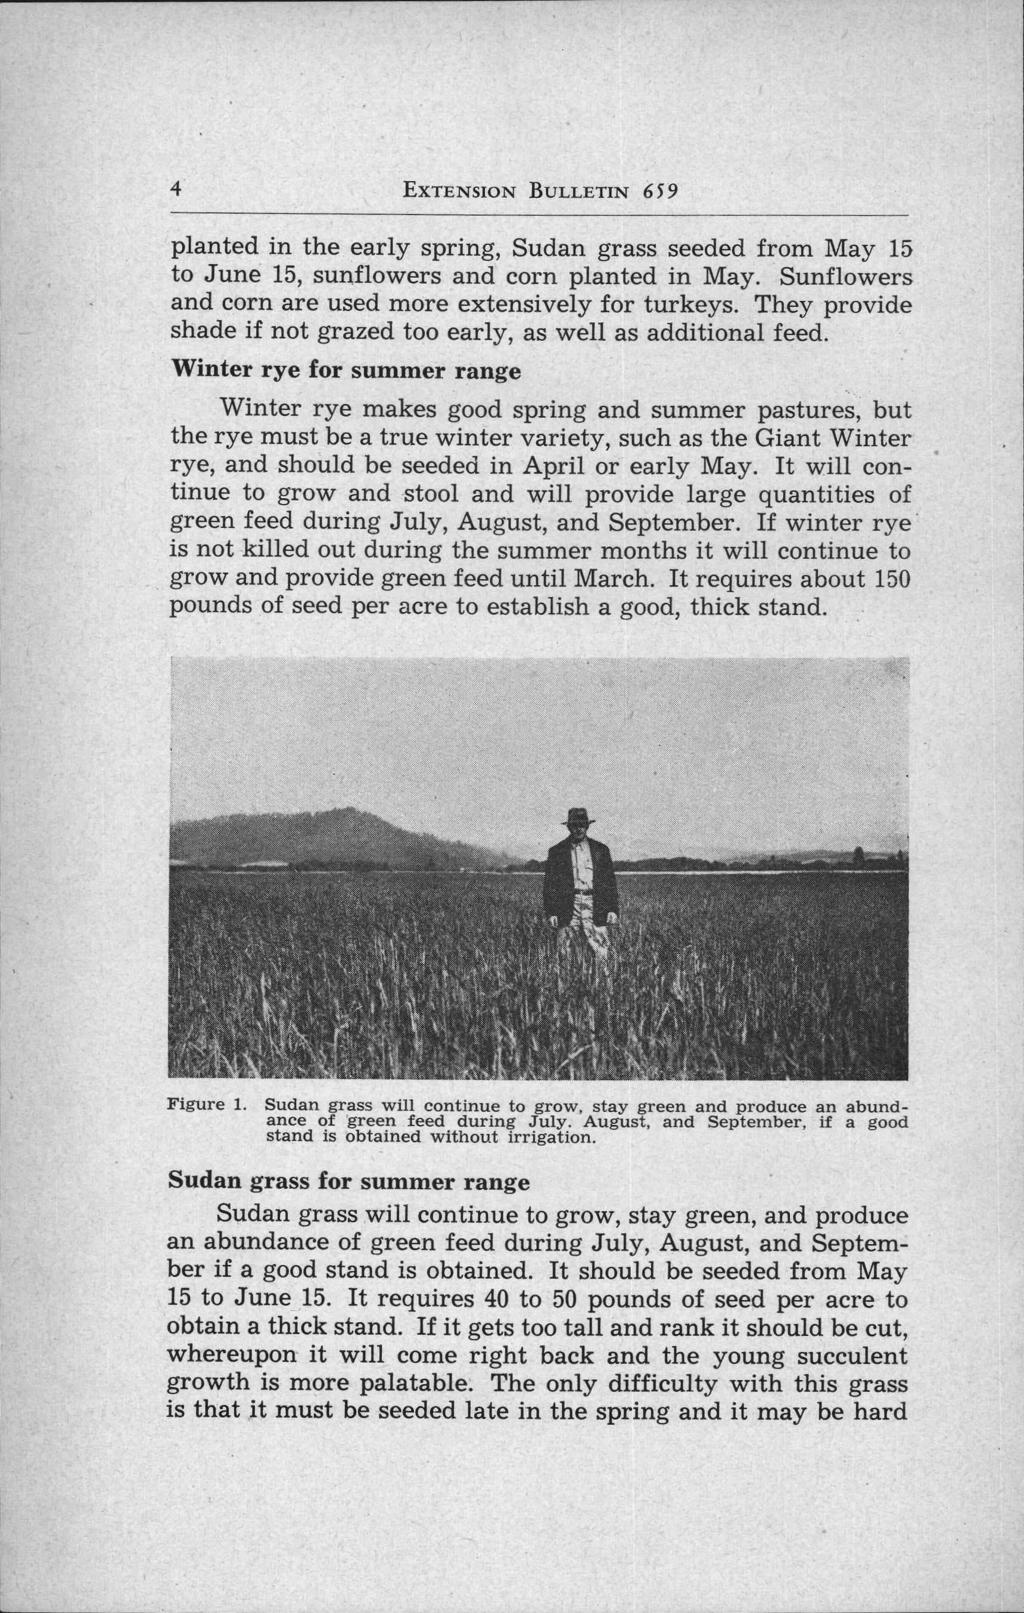 4 EXTENSION BULLETIN 659 planted in the early spring, Sudan grass seeded from May 15 to June 15, sunflowers and corn planted in May. Sunflowers and corn are used more extensively for turkeys.